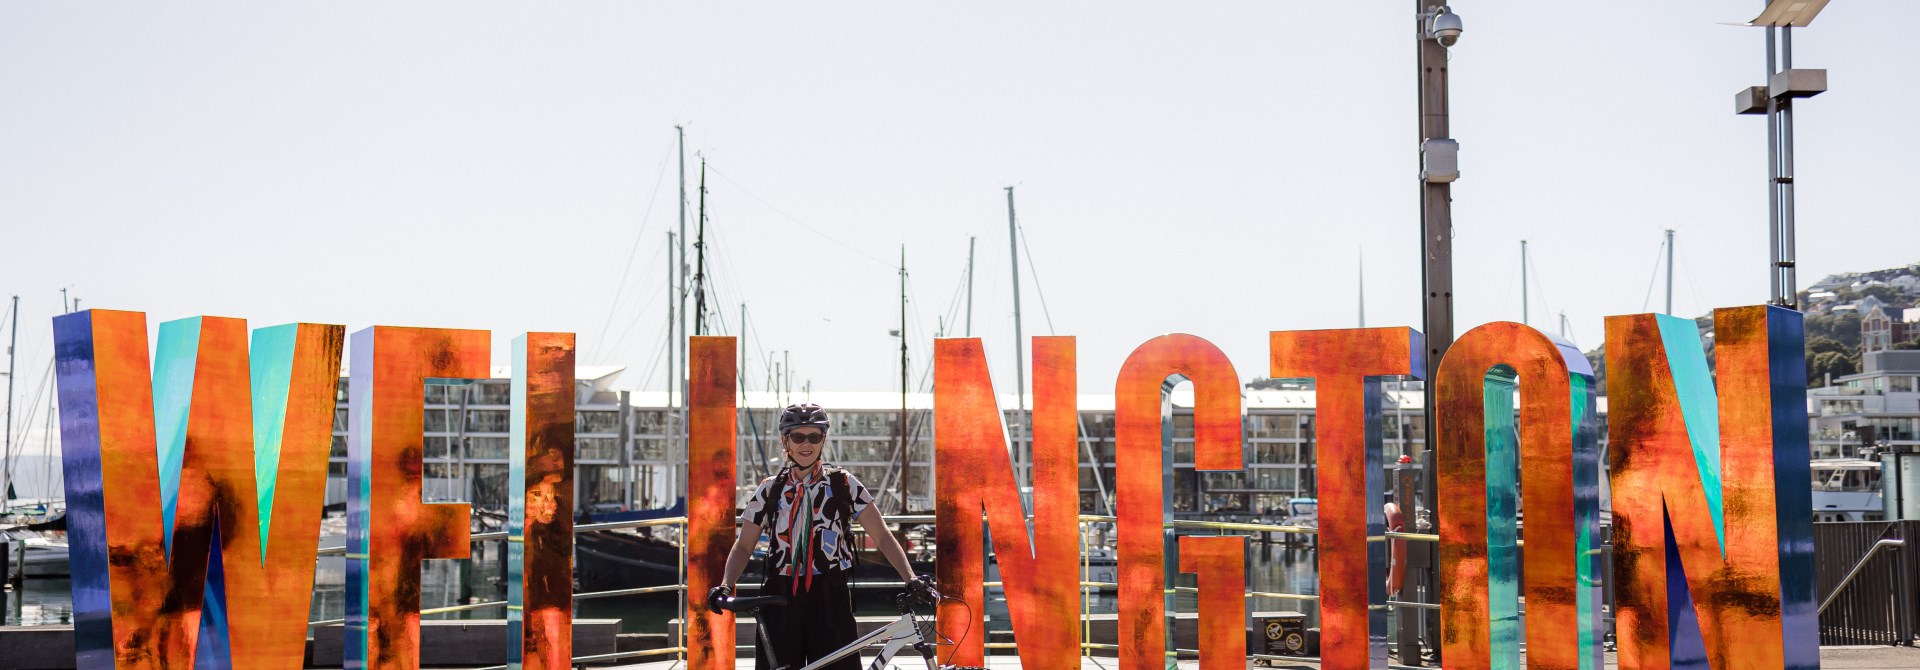 Woman standing behind her bike, infront of the 'Well_ngton' sign.